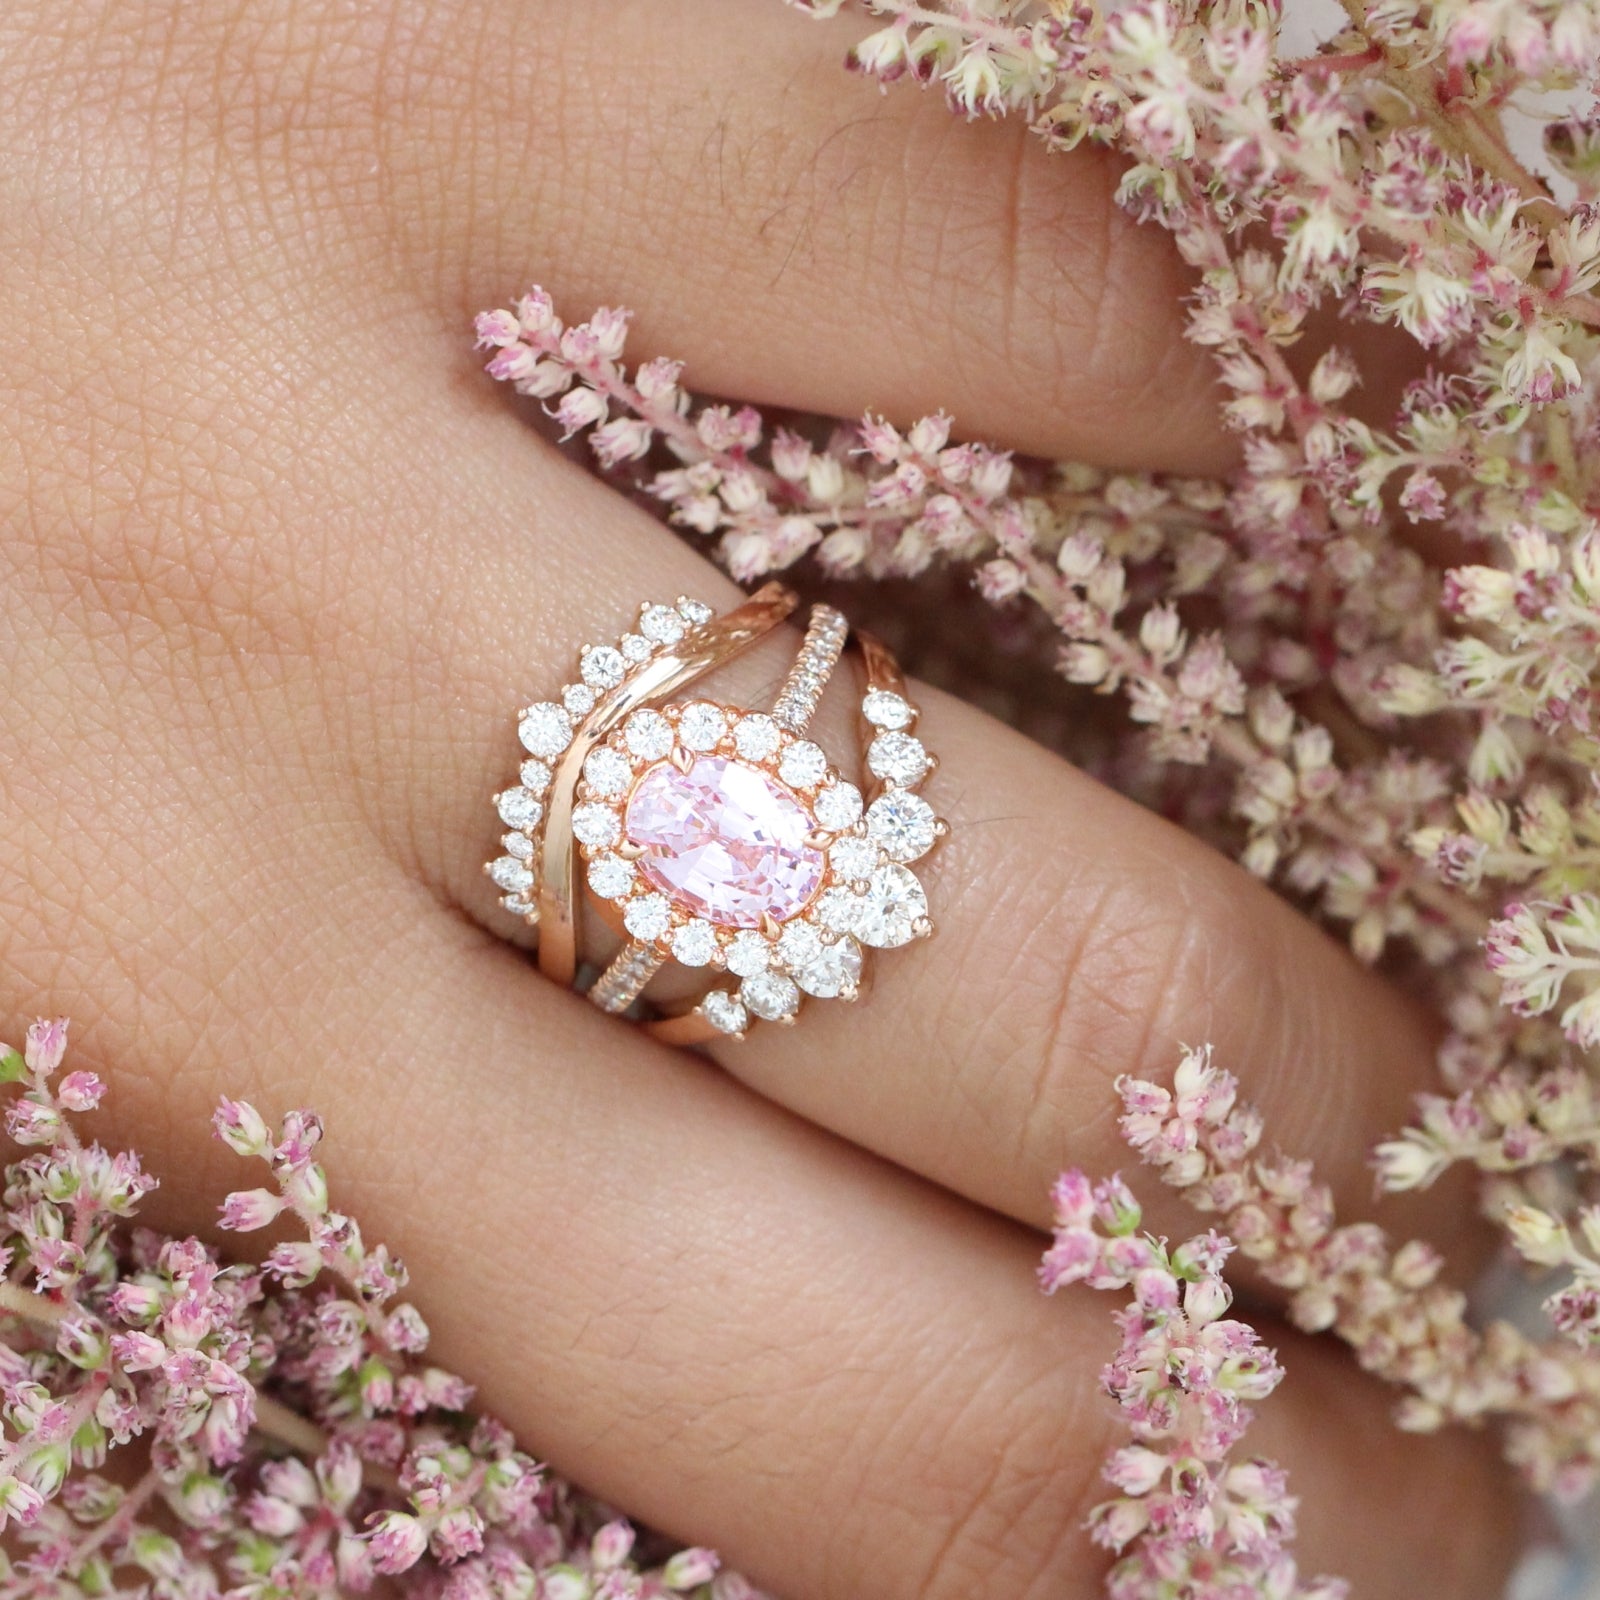 peach sapphire engagement ring diamond stacking ring set rose gold by la more design jewelry